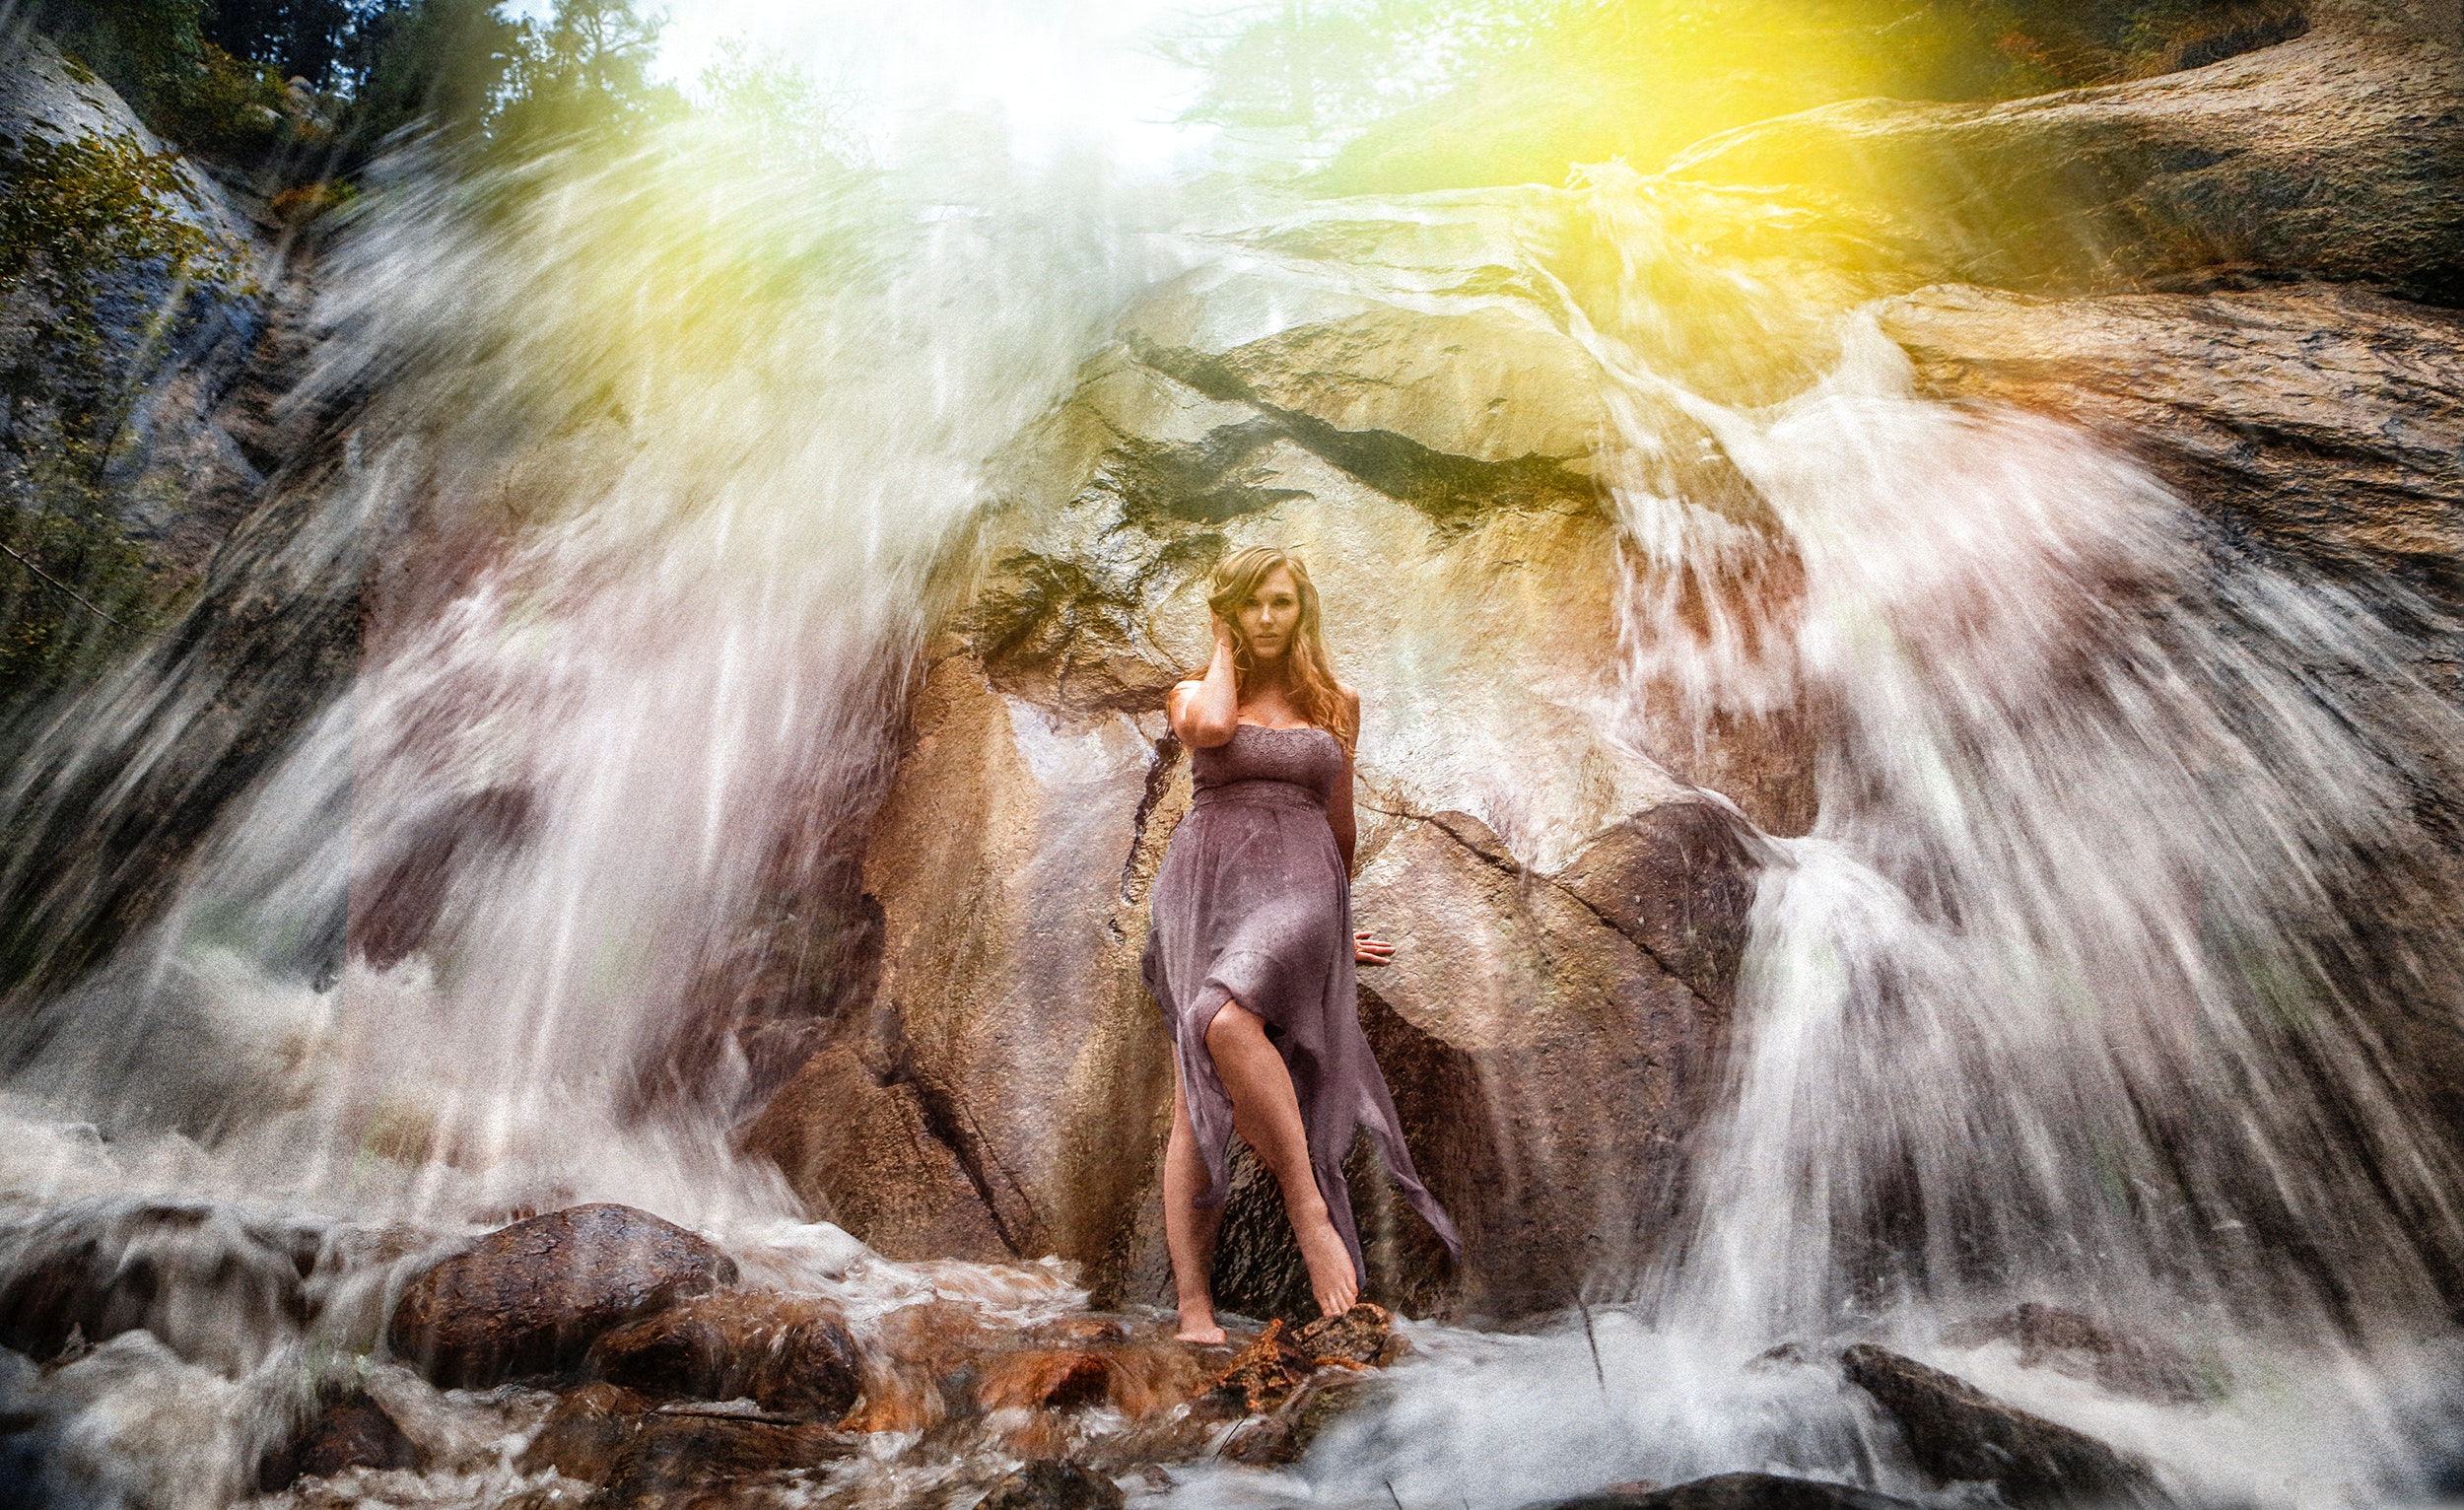 Woman in Gray Strapless Long Dress Standing Under Waterfalls, River, Woman, Wet, Waterfalls, HQ Photo